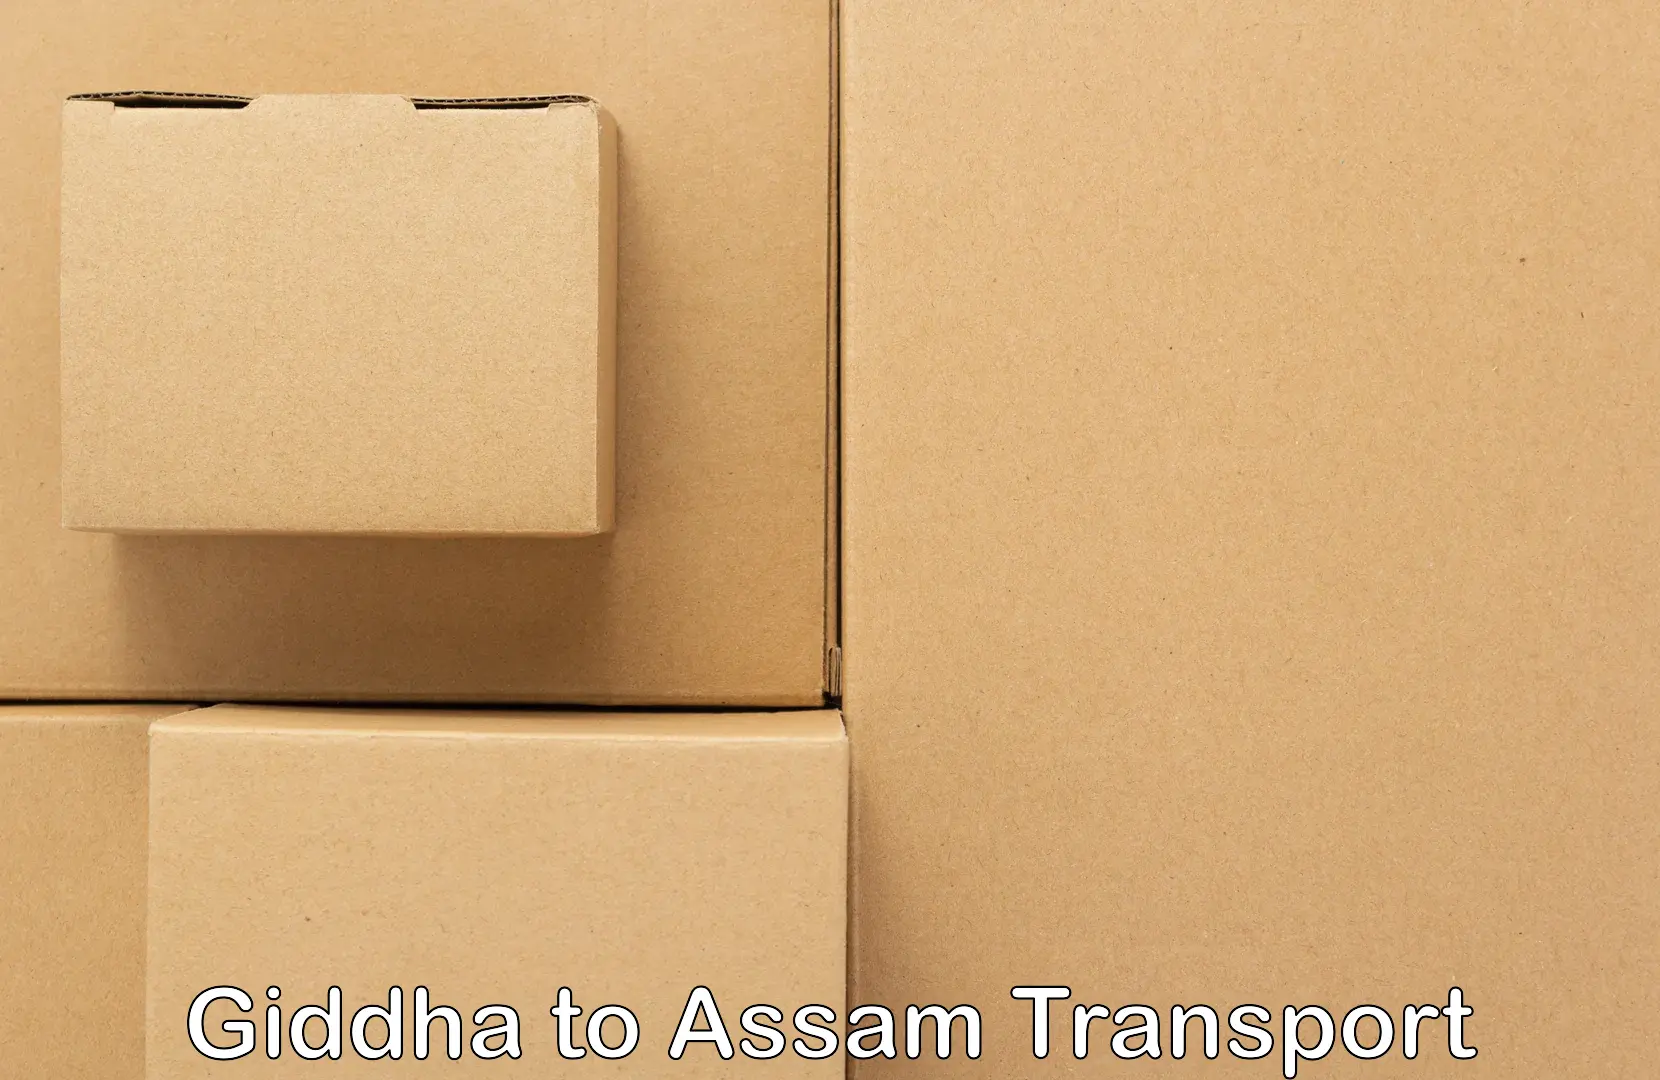 Express transport services in Giddha to Assam